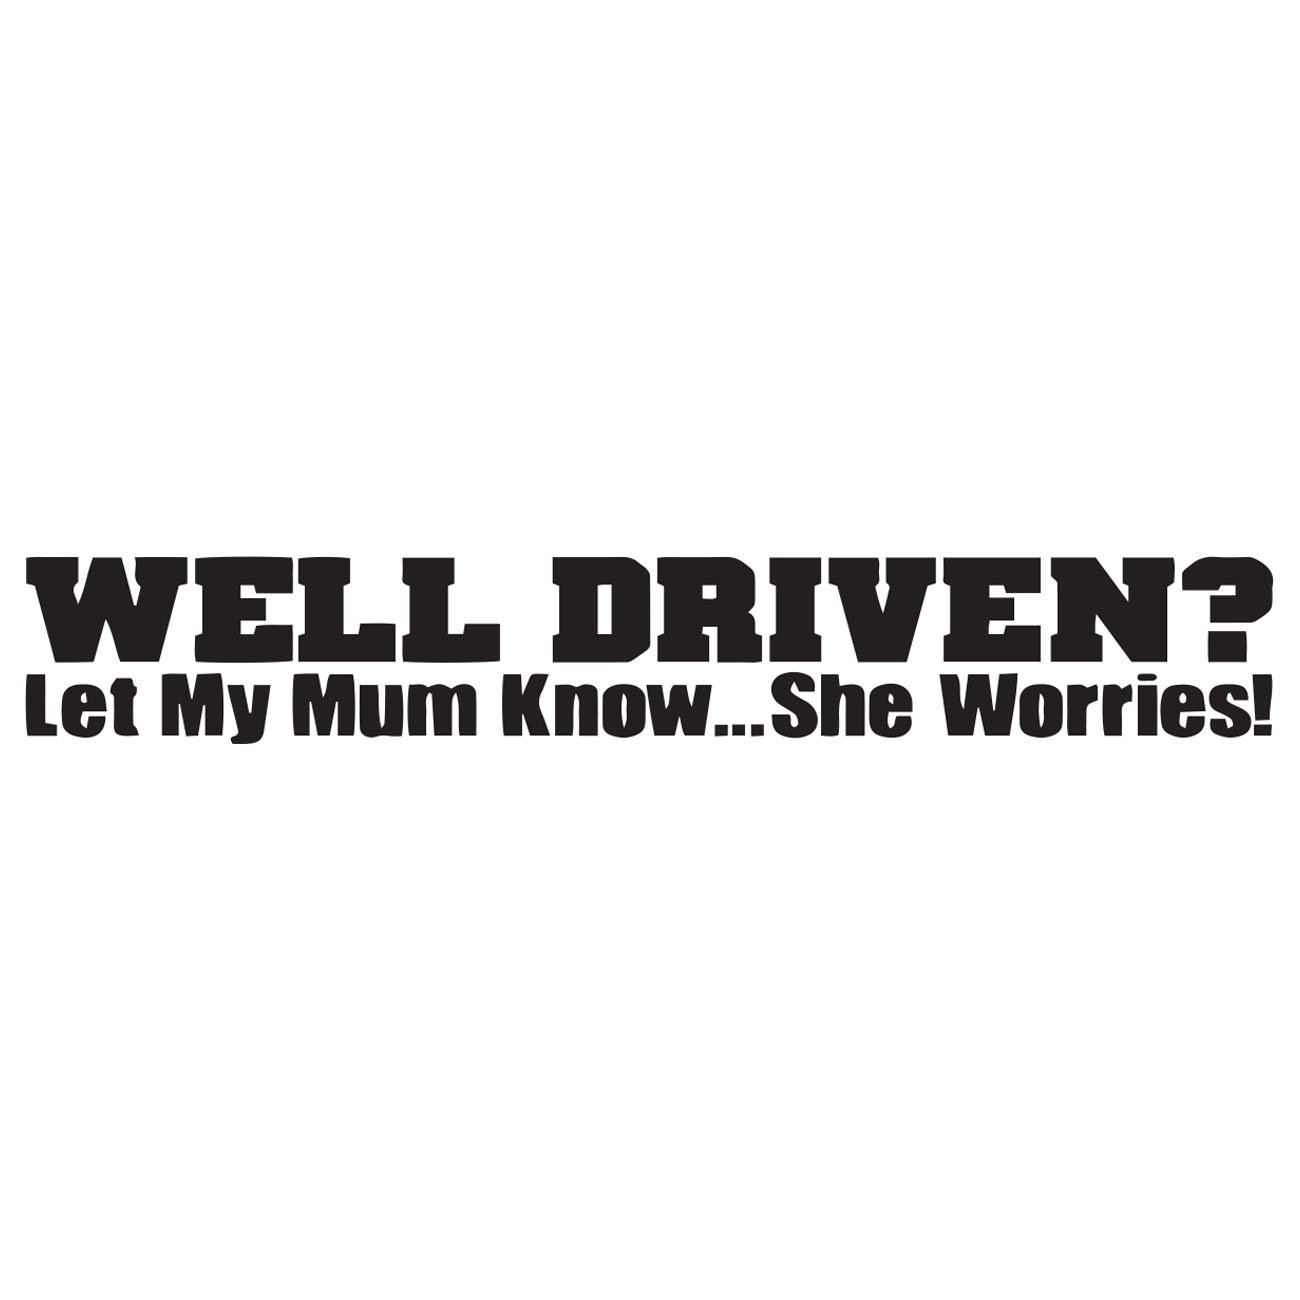 Well Driven? - Let my mom know? She Worries!